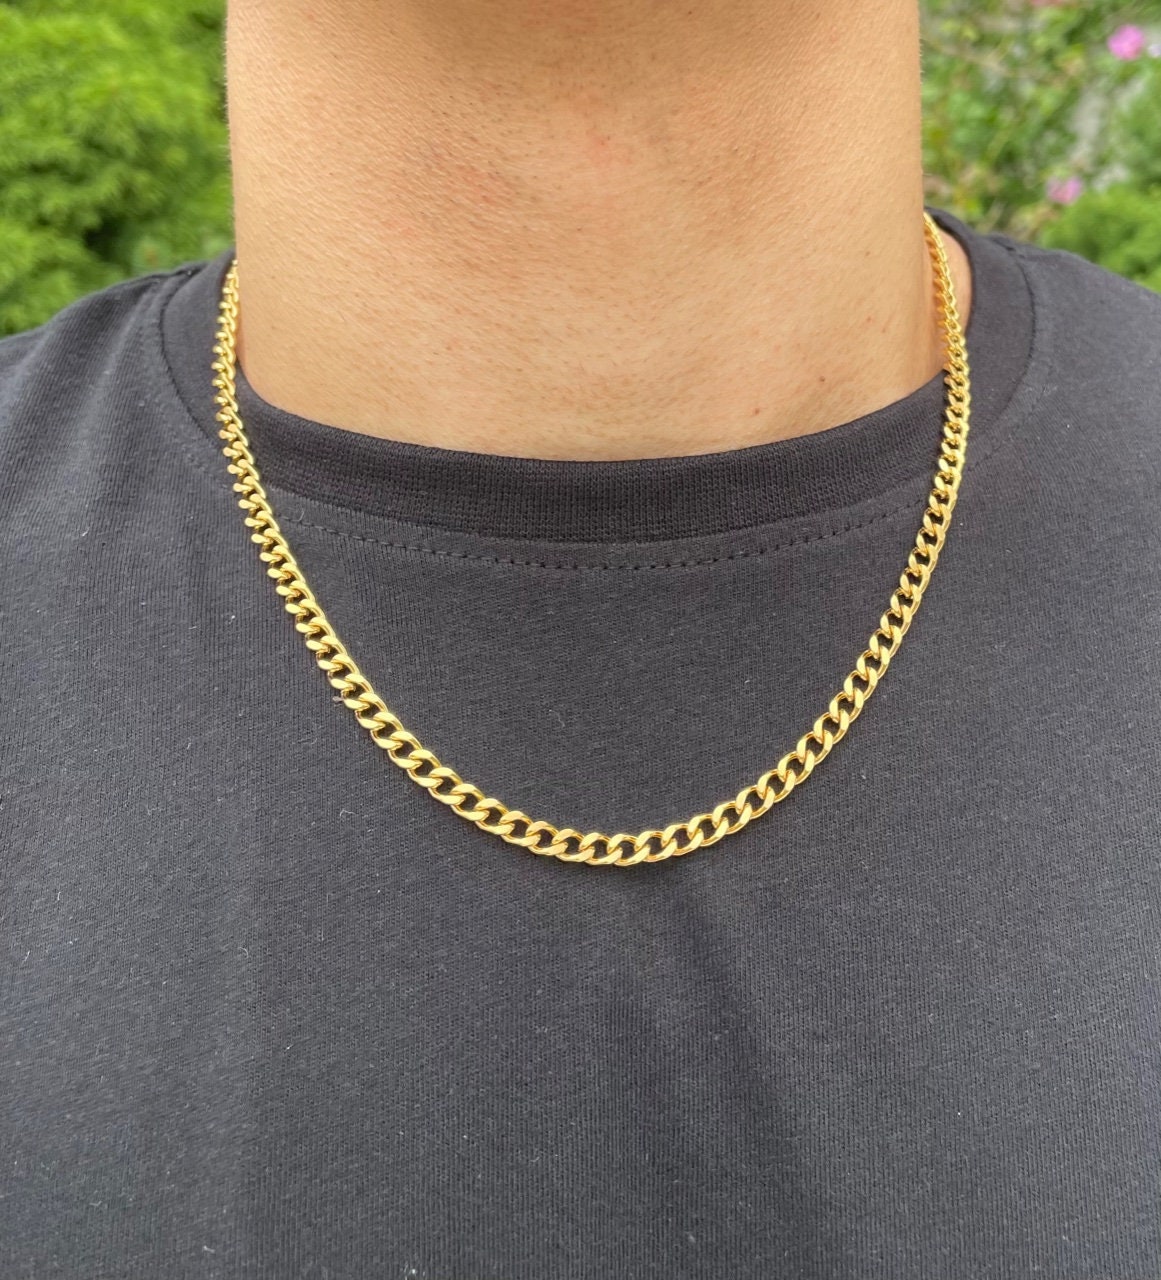 Miami Cuban Link Chain 5mm | peacecommission.kdsg.gov.ng